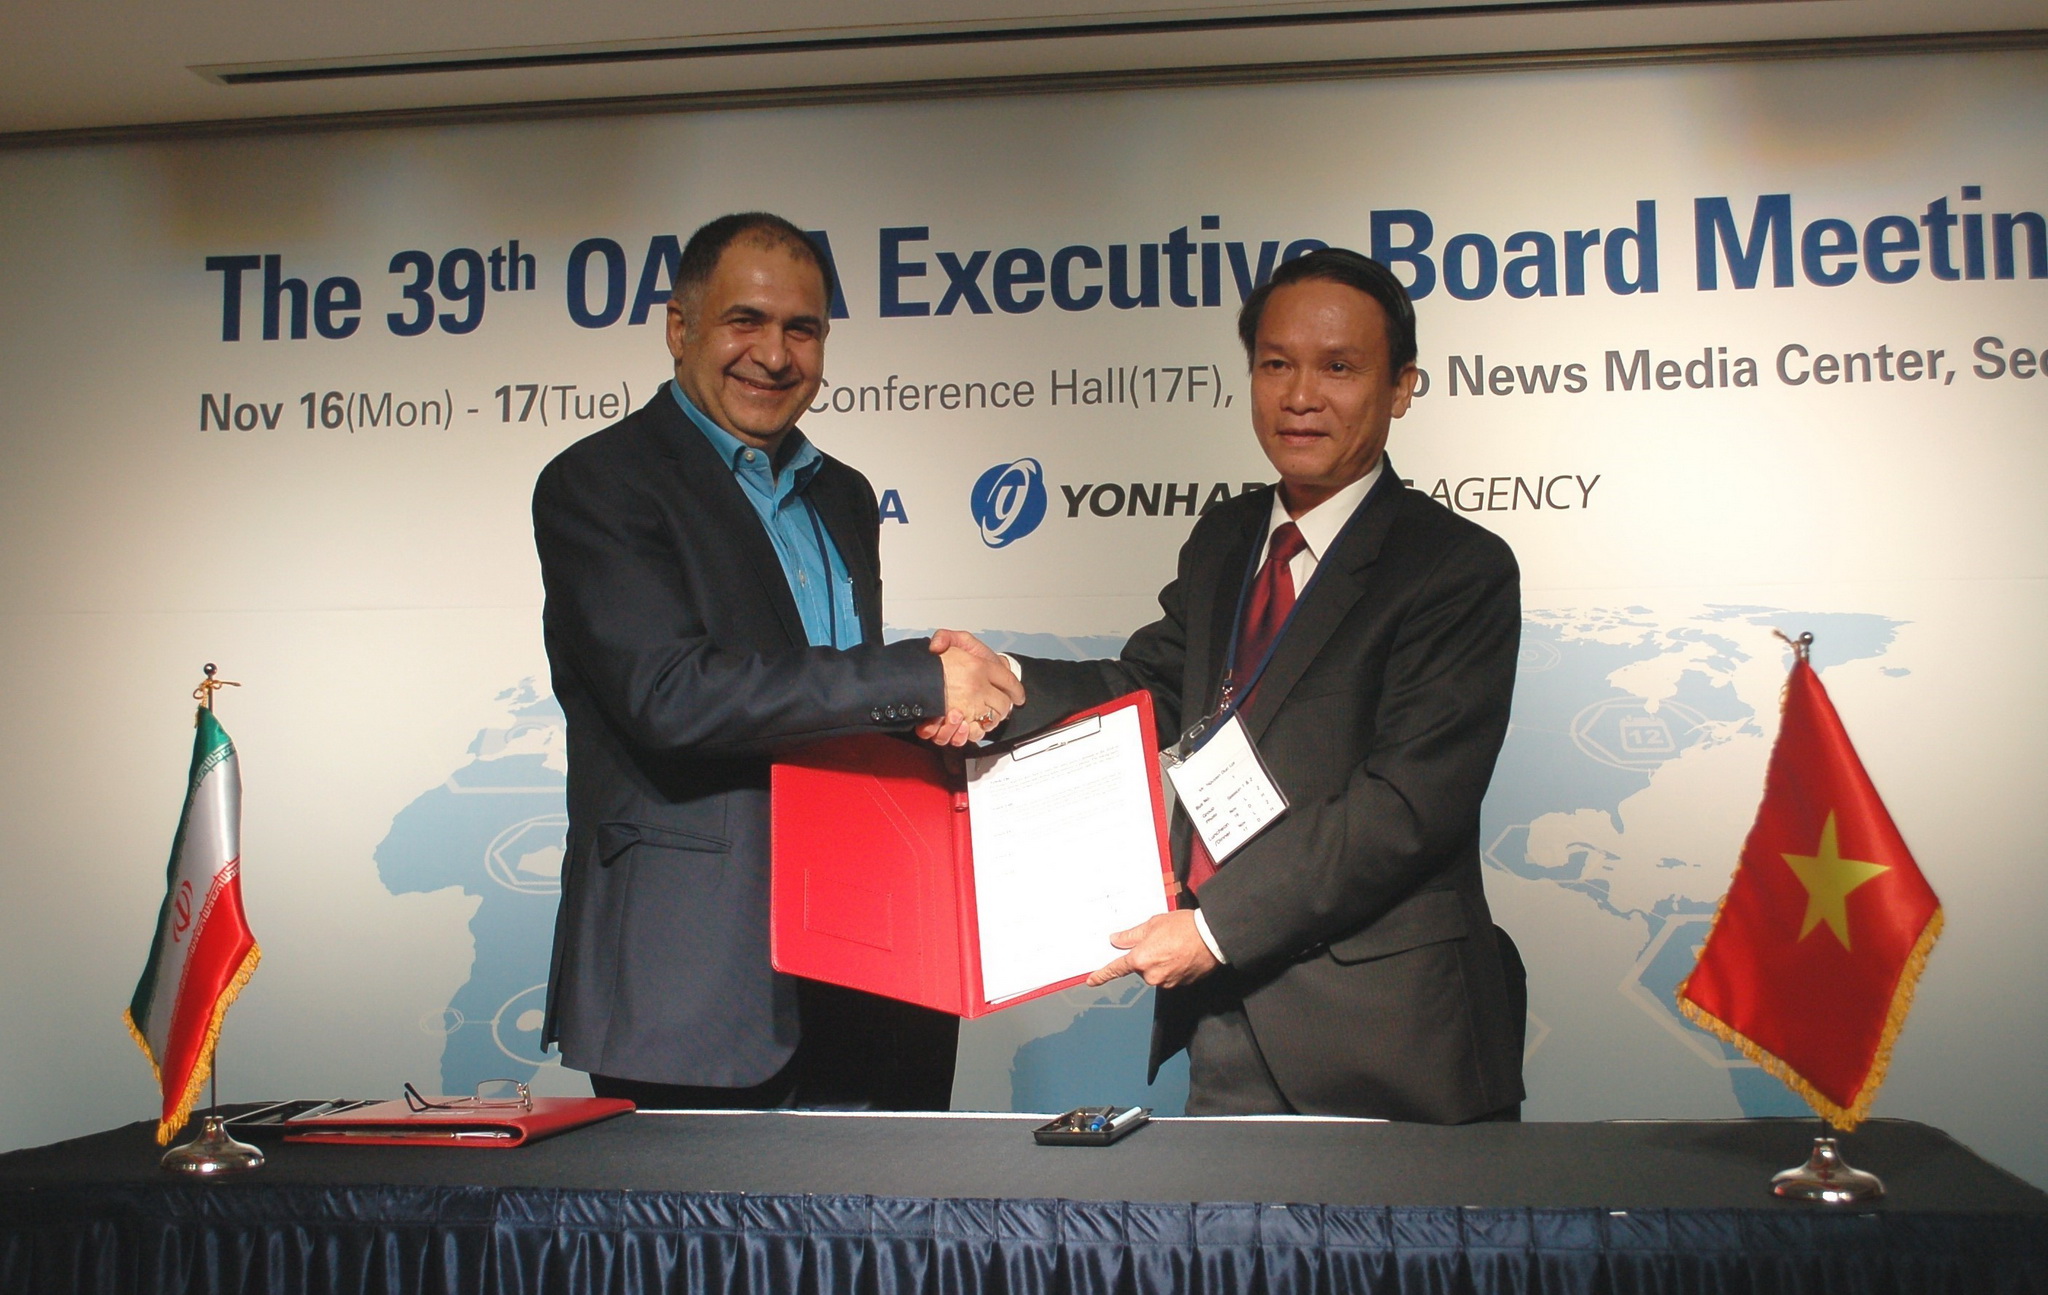 In the framework of his attendance at the 39th OANA Executive Board Meeting from Naovember 16-17, 2015 in Seoul, the Republic of Korea, VNA General Director Nguyen Duc Loi (right) and IRNA Executive Director Mohammad Khodadi signed an agreement on bilateral information exchange, under which the two sides will exchange visits, join hands in training journalist skills and provide equipment. Photo: VNA.